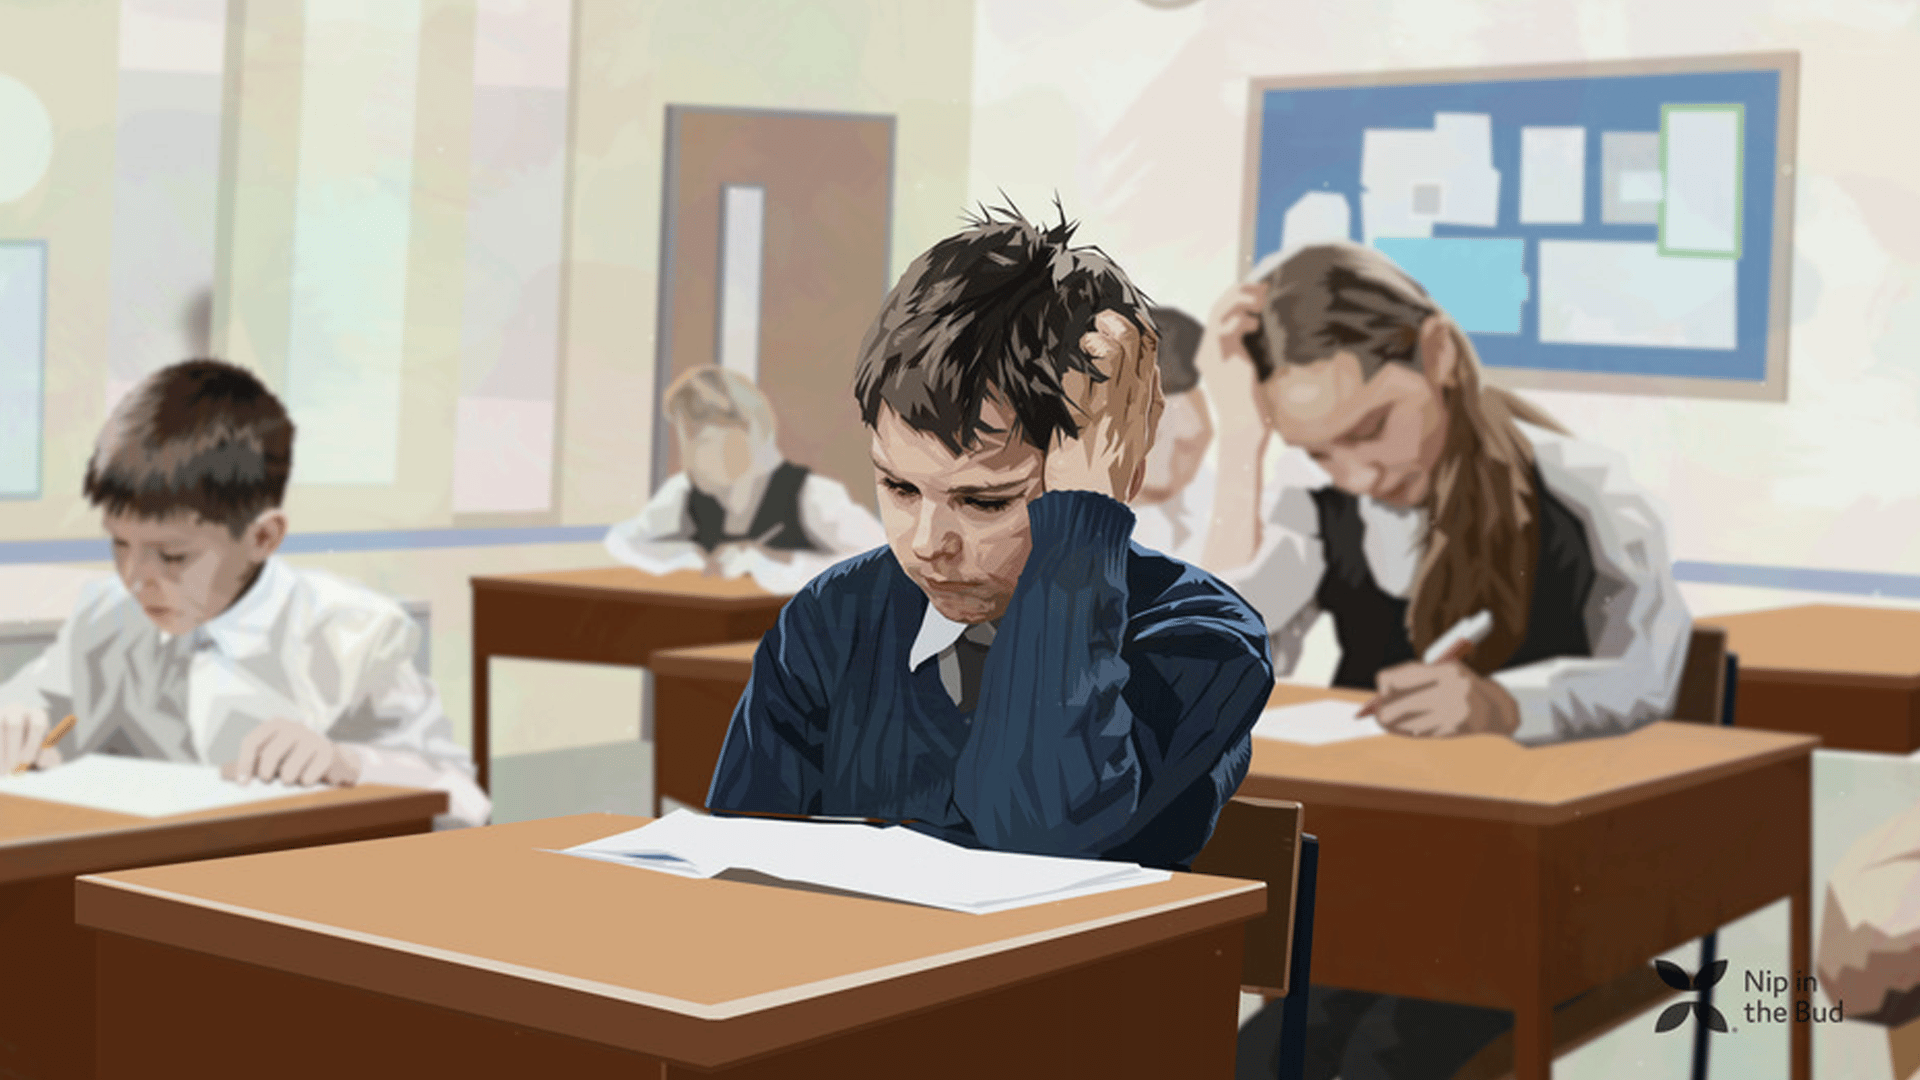 Illustration of child at school with head in their hands